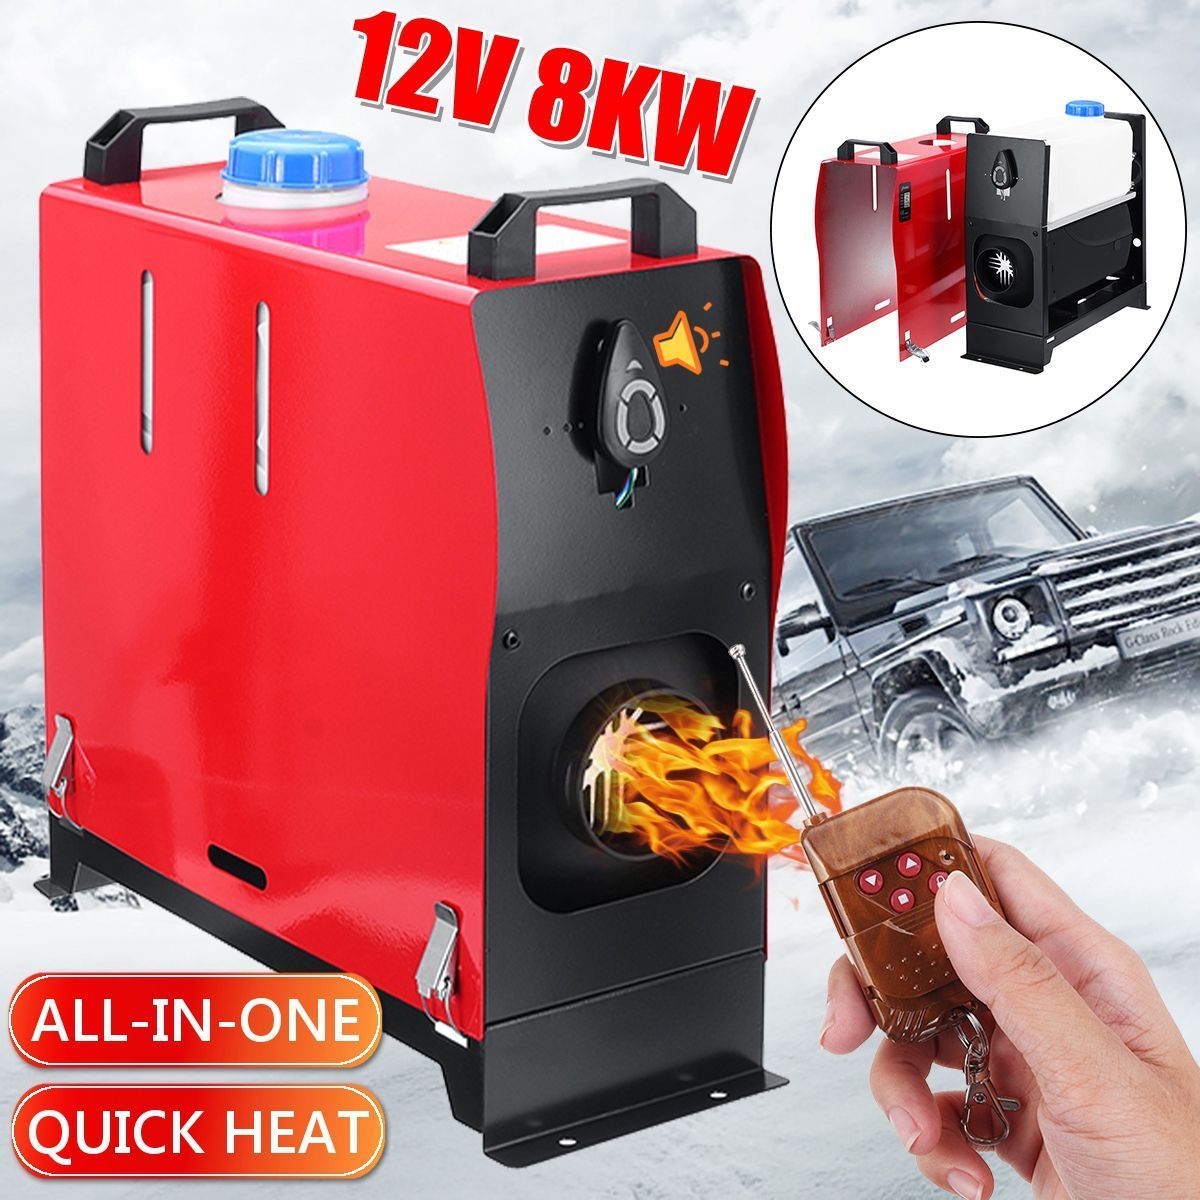 All-in-One-Unit-8KW-12V-Voice-Broadcast-Car-Heating-Tool-Diesel-Air-Heater-Single-Hole-Parking-Warme-1602180